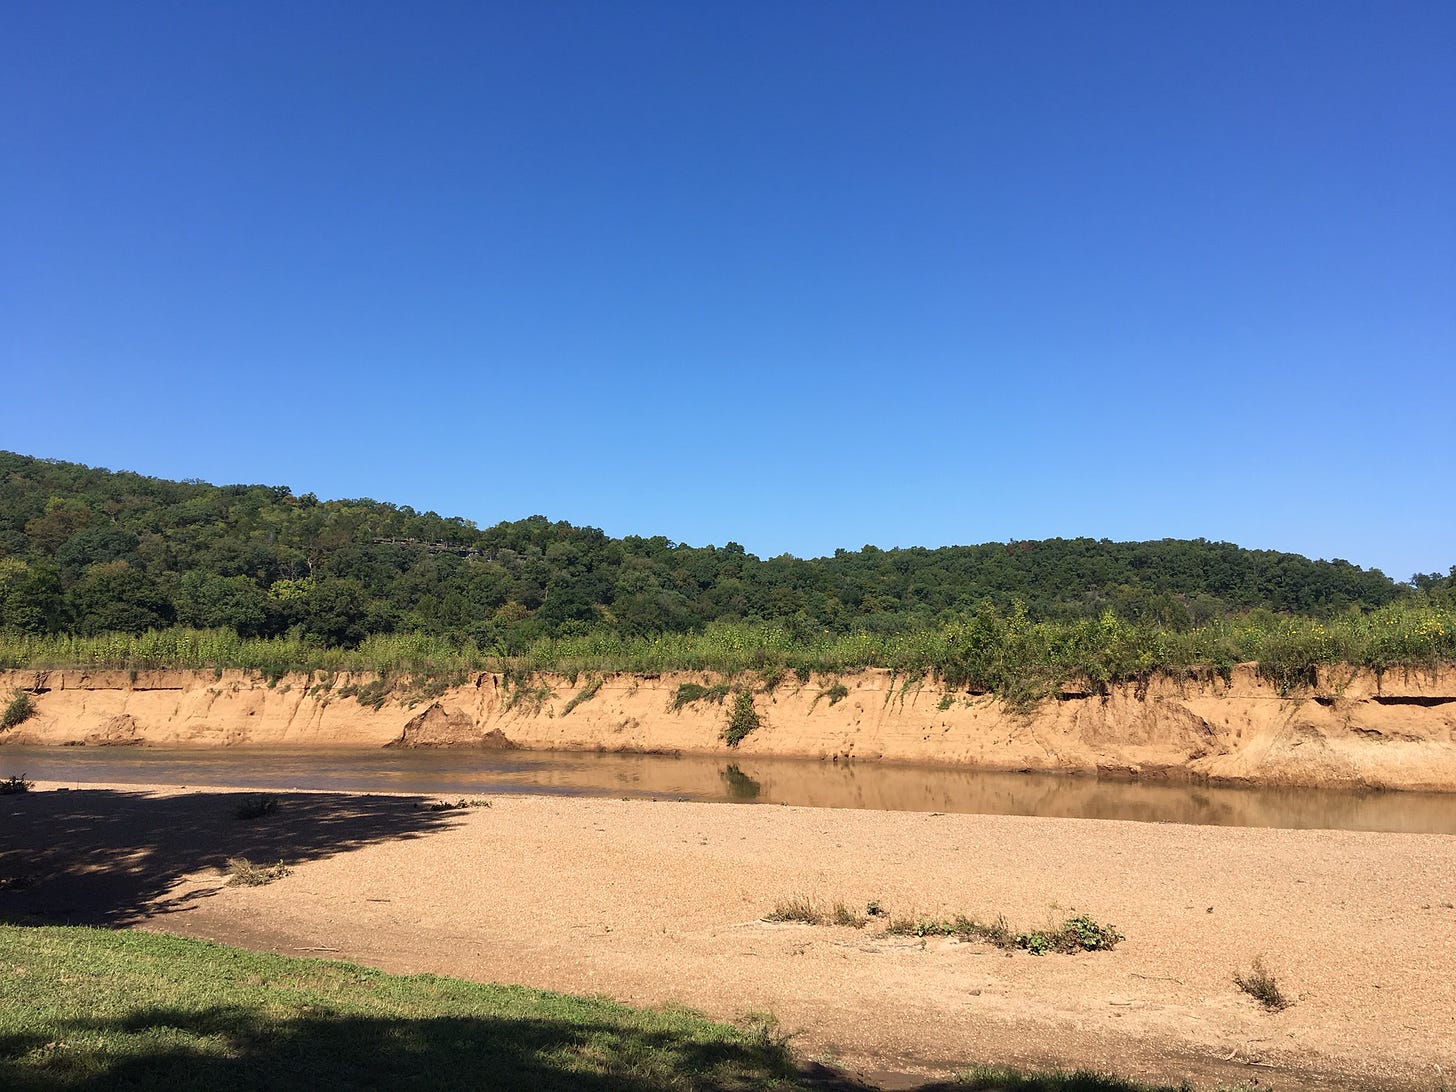 A river with a beach on one side and a bank of light tan soil on the other under a blue sky